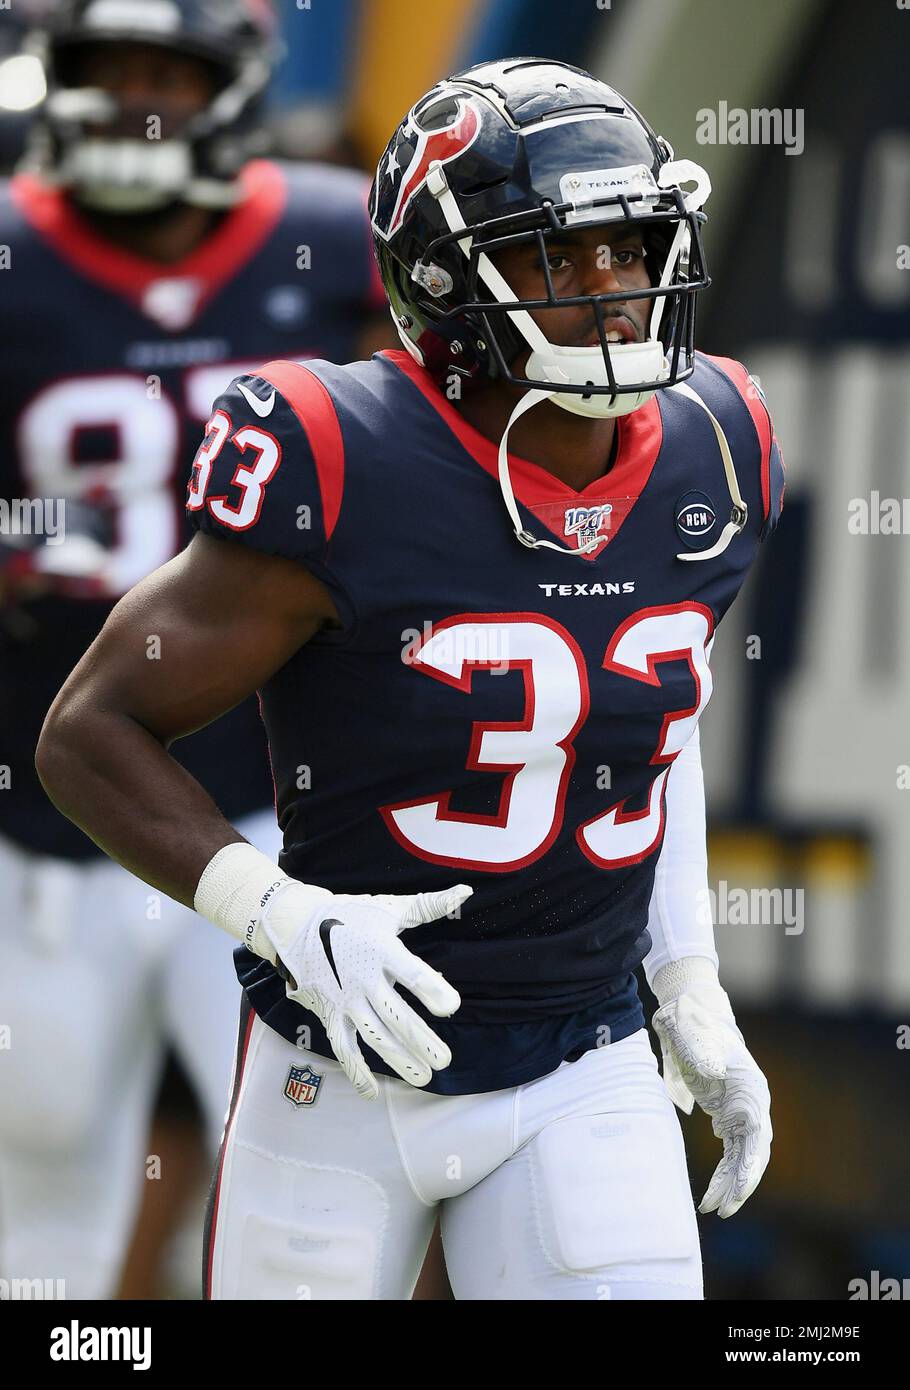 Houston Texans safety A.J. Moore Jr. (33) heads onto the field